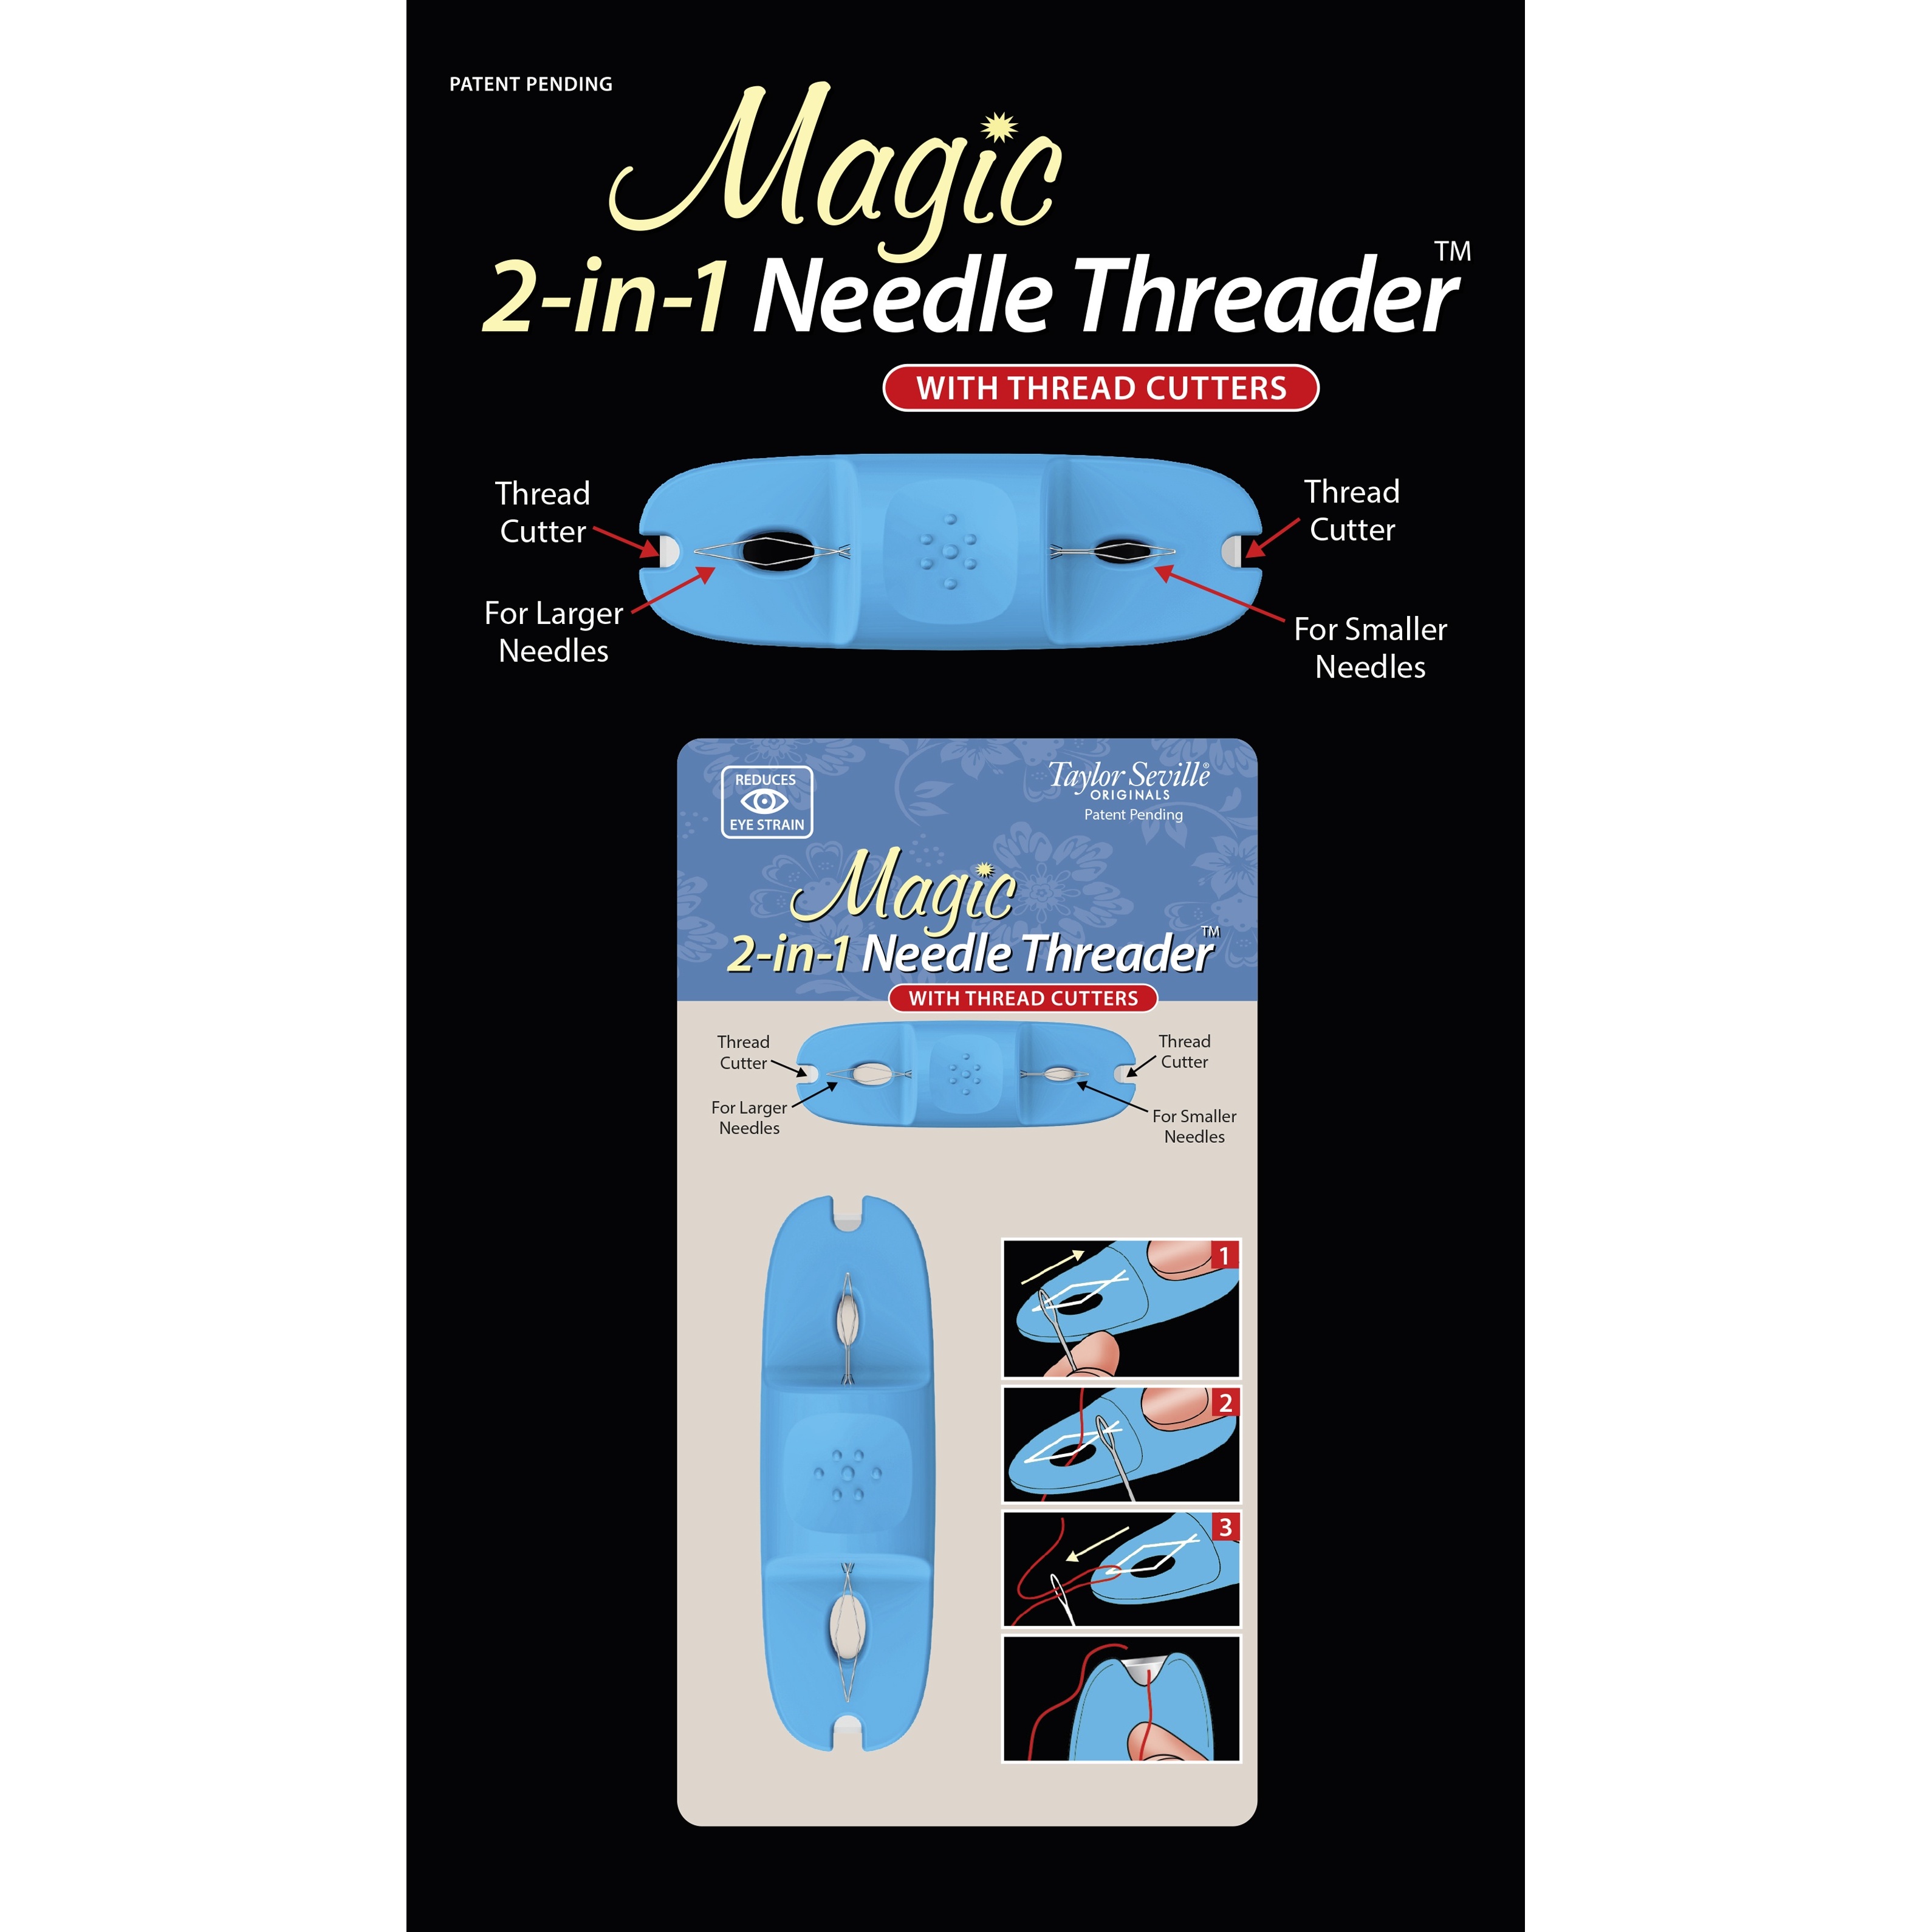 Taylor Seville Magic 2-In-1 Needle Threader™ with Thread Cutters